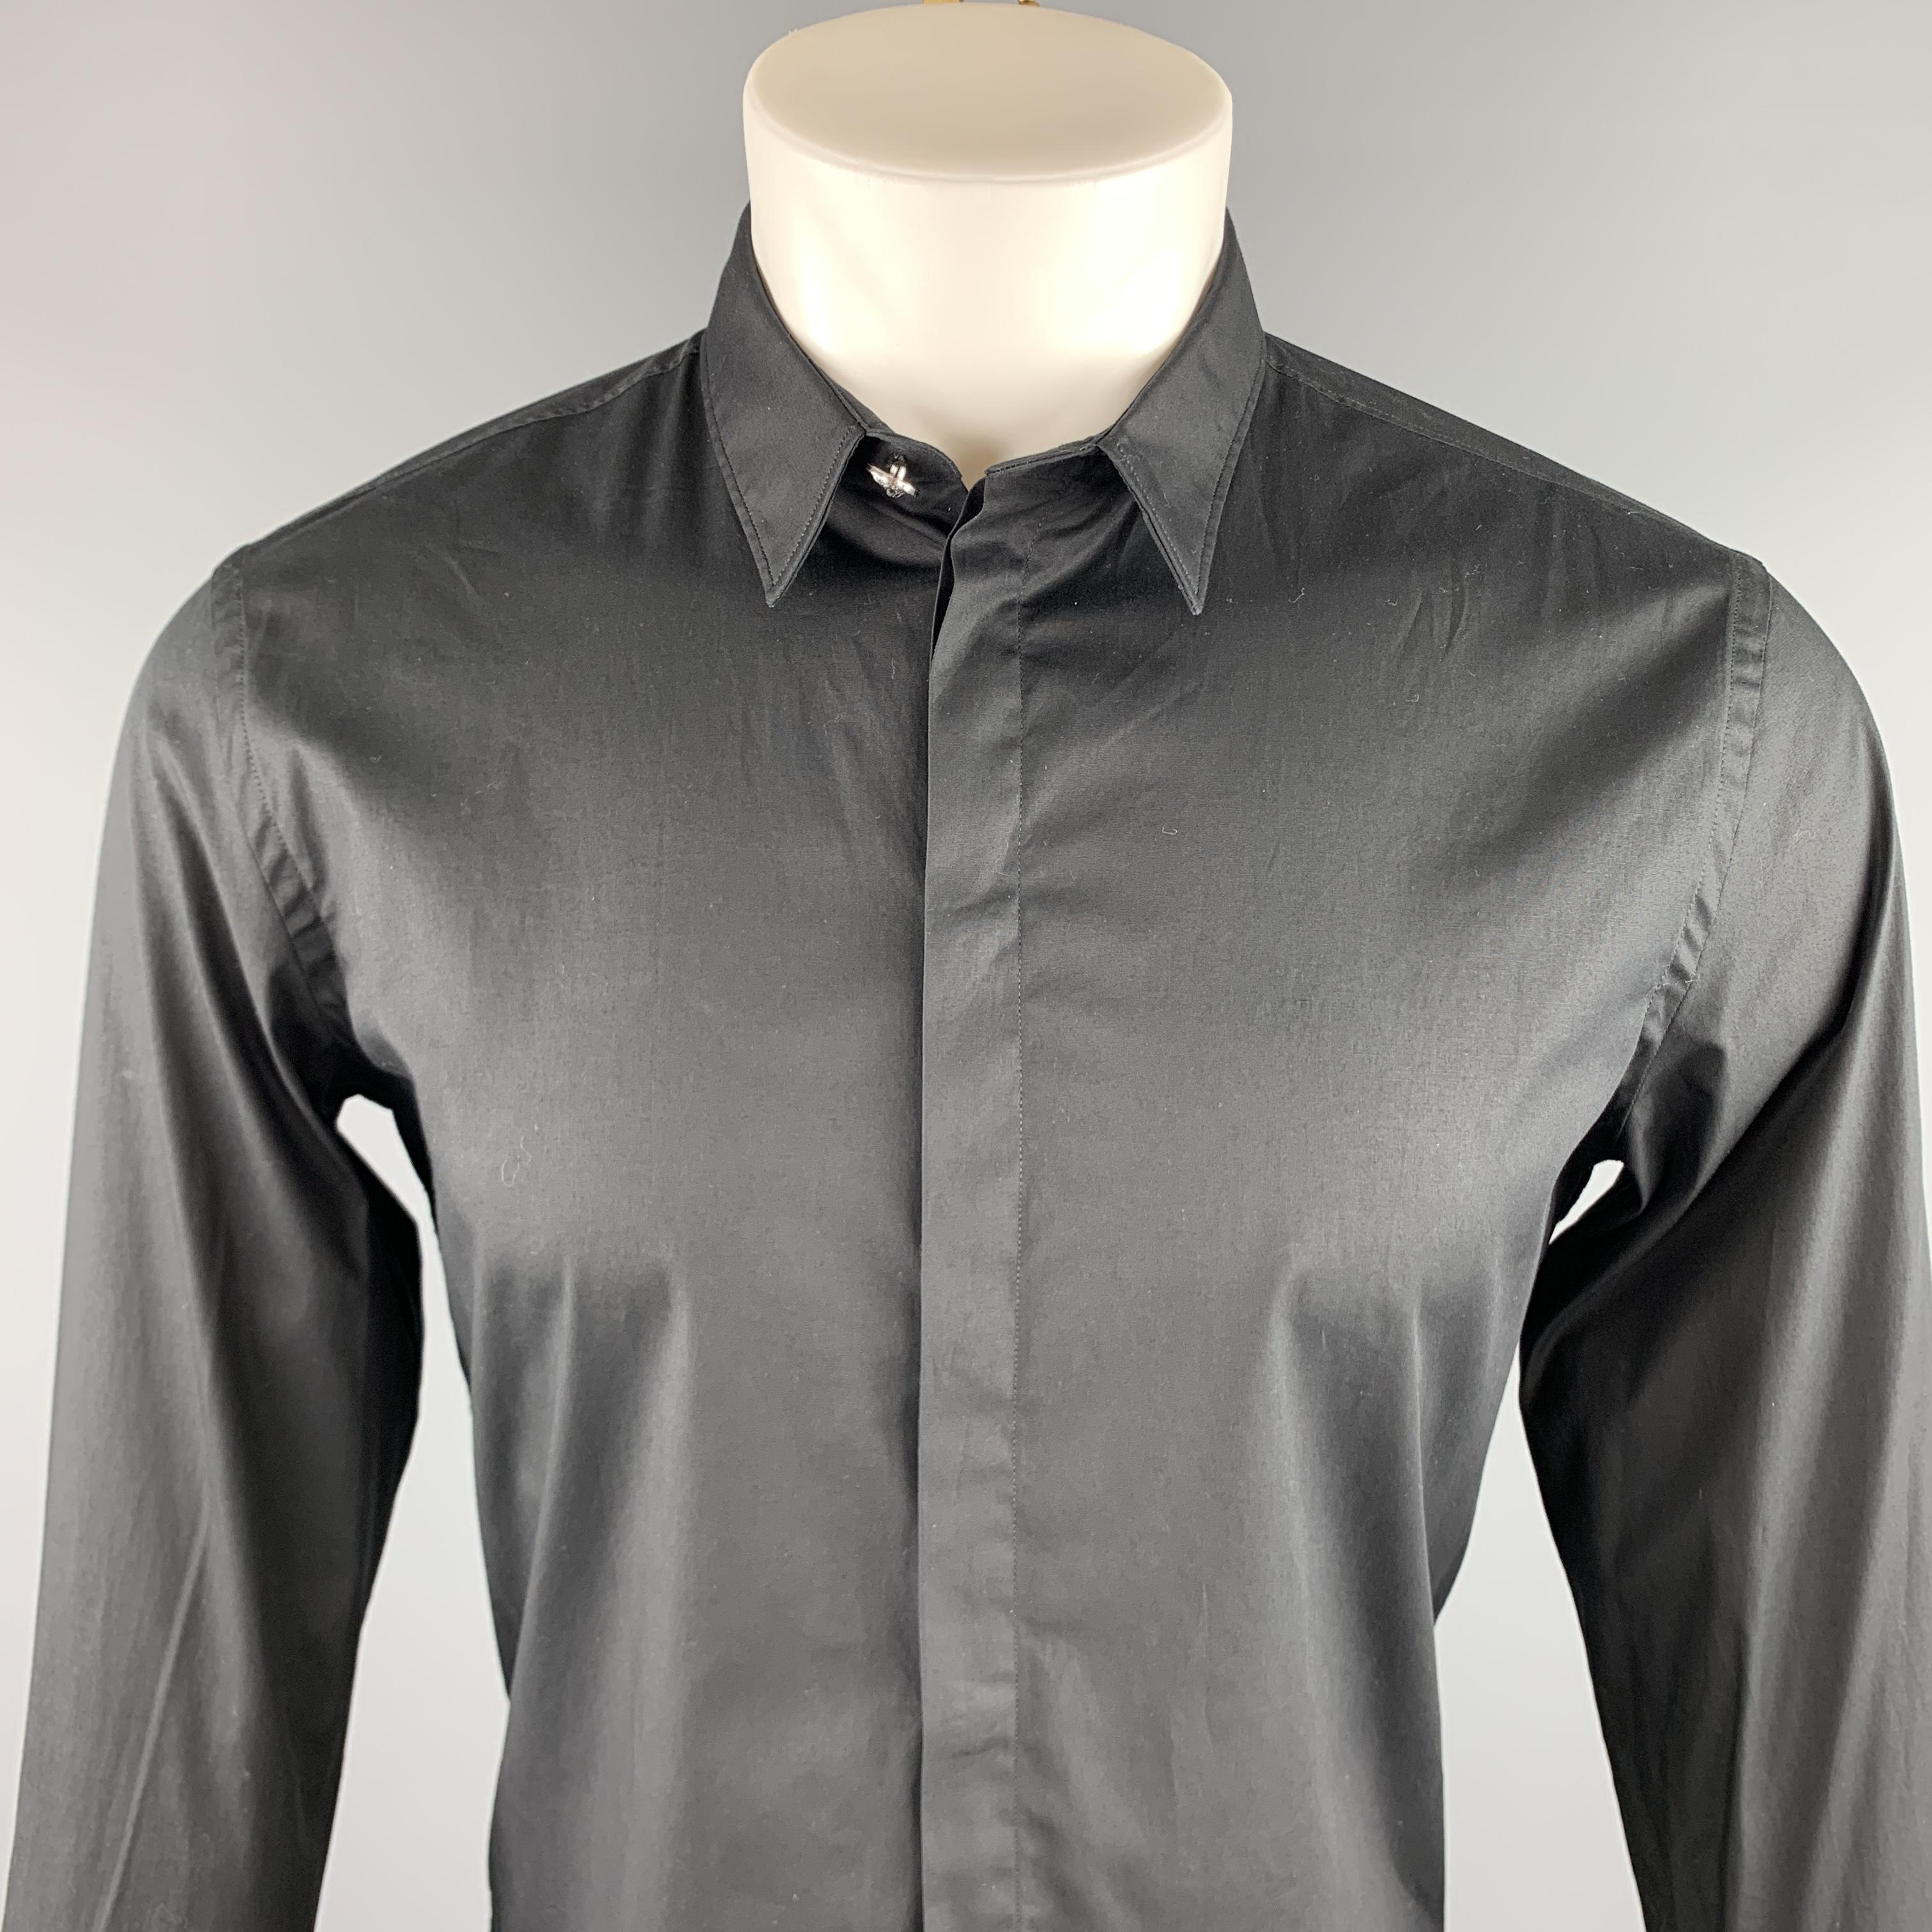 VERSUS by GIANNI VERSACE long sleeve shirt comes in a black cotton featuring a back mesh floral detail and hidden button up style. Made in Portugal.

Excellent Pre-Owned Condition.
Marked: 48

Measurements:

Shoulder: 16.5 in. 
Chest: 42 in.